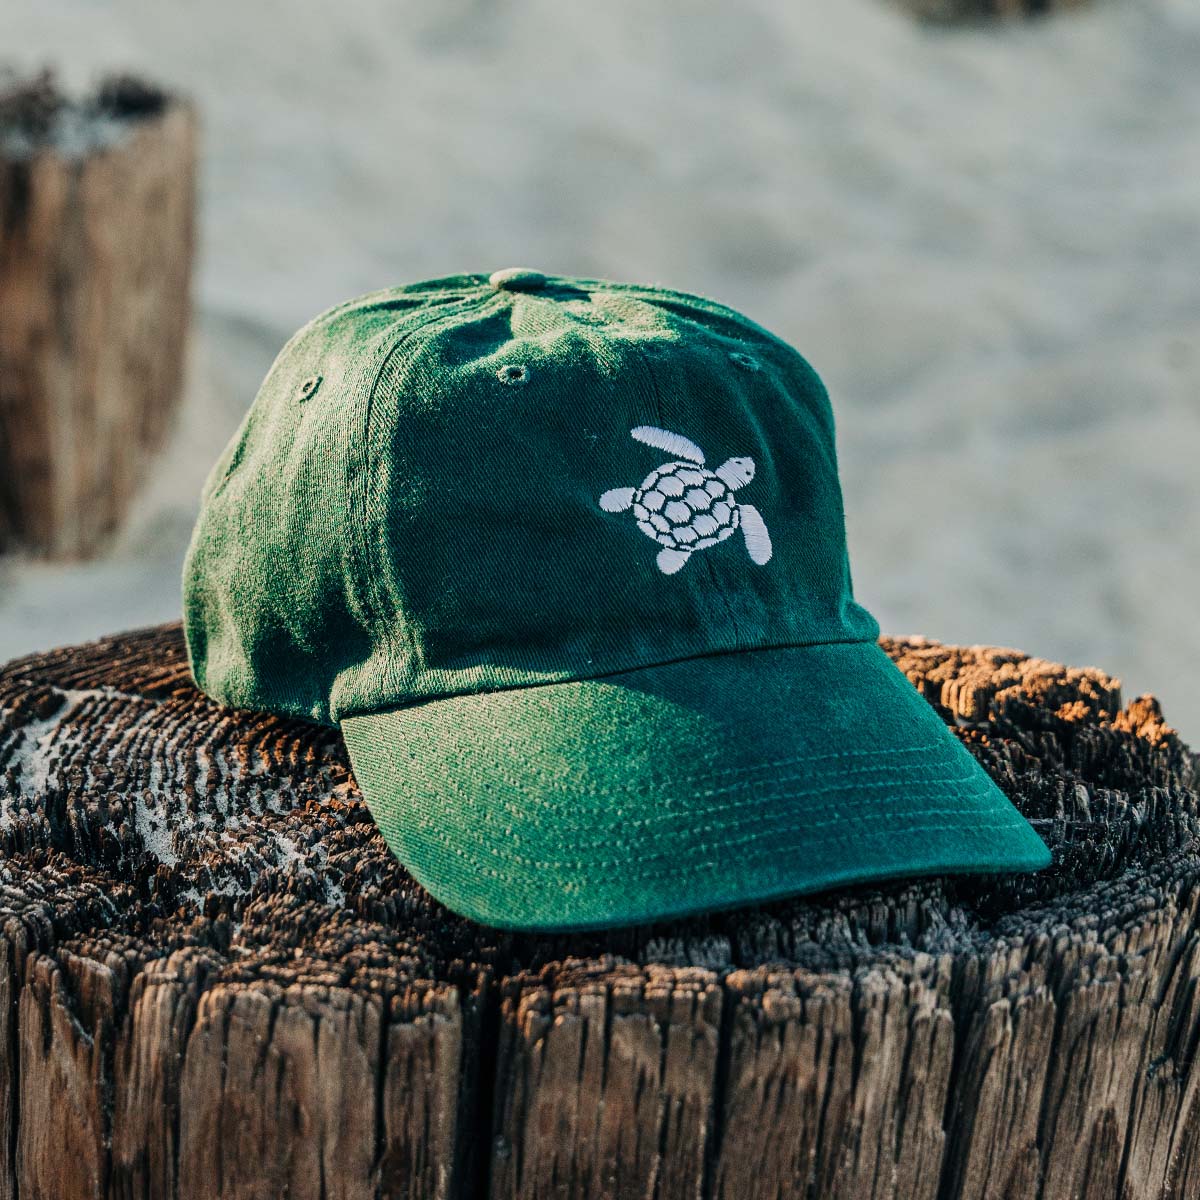 Green original turtle on front and green "Sea Green Apparel" embroidery on back 100% Cotton Twill Metal rivet on back Adjustable strap with buckle for comfortable wear